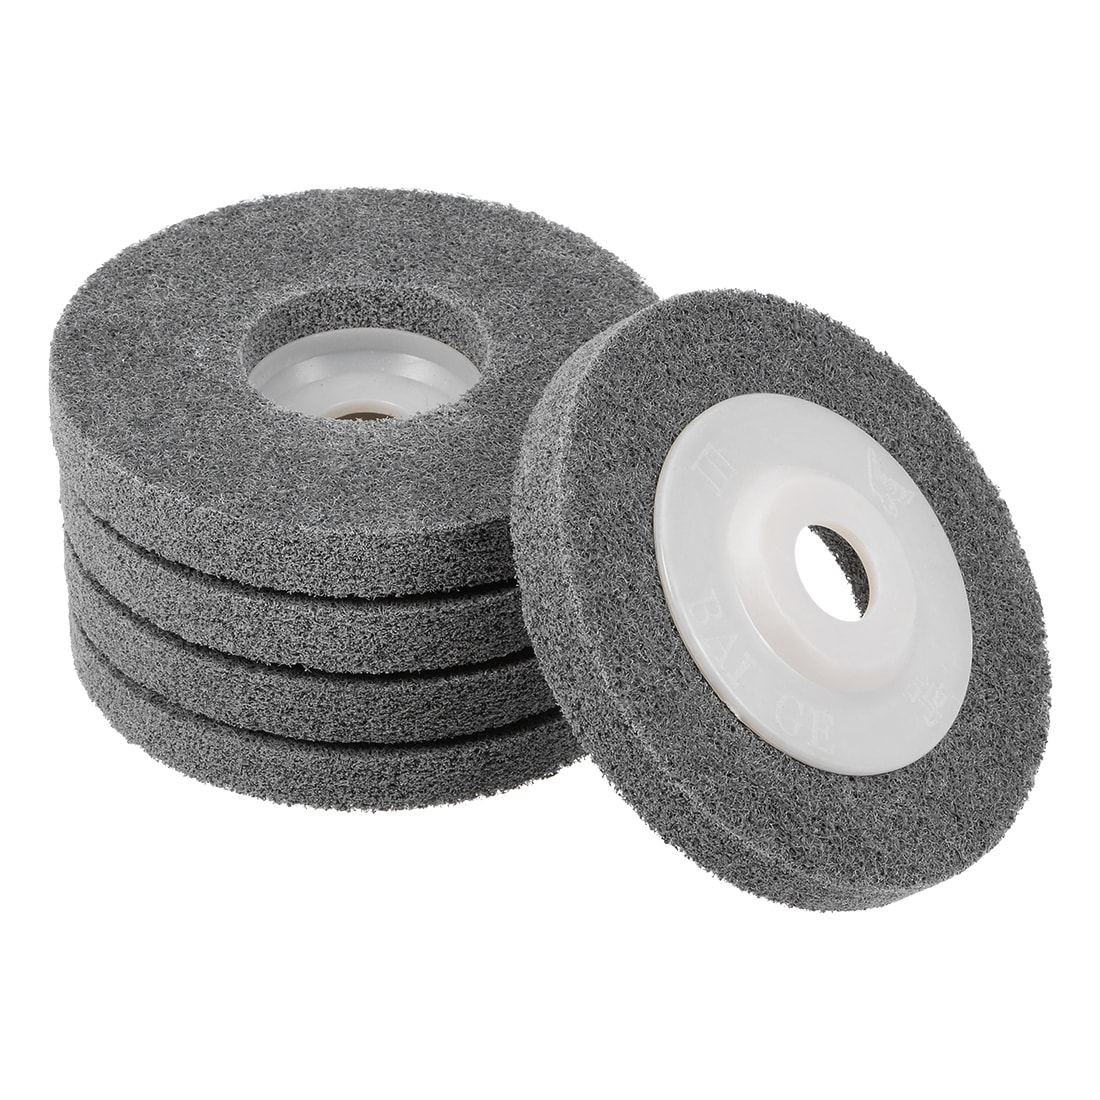 4inch Nylon Fiber Polishing Buffing Wheel Pad Disc Replacement For Angle Grinder